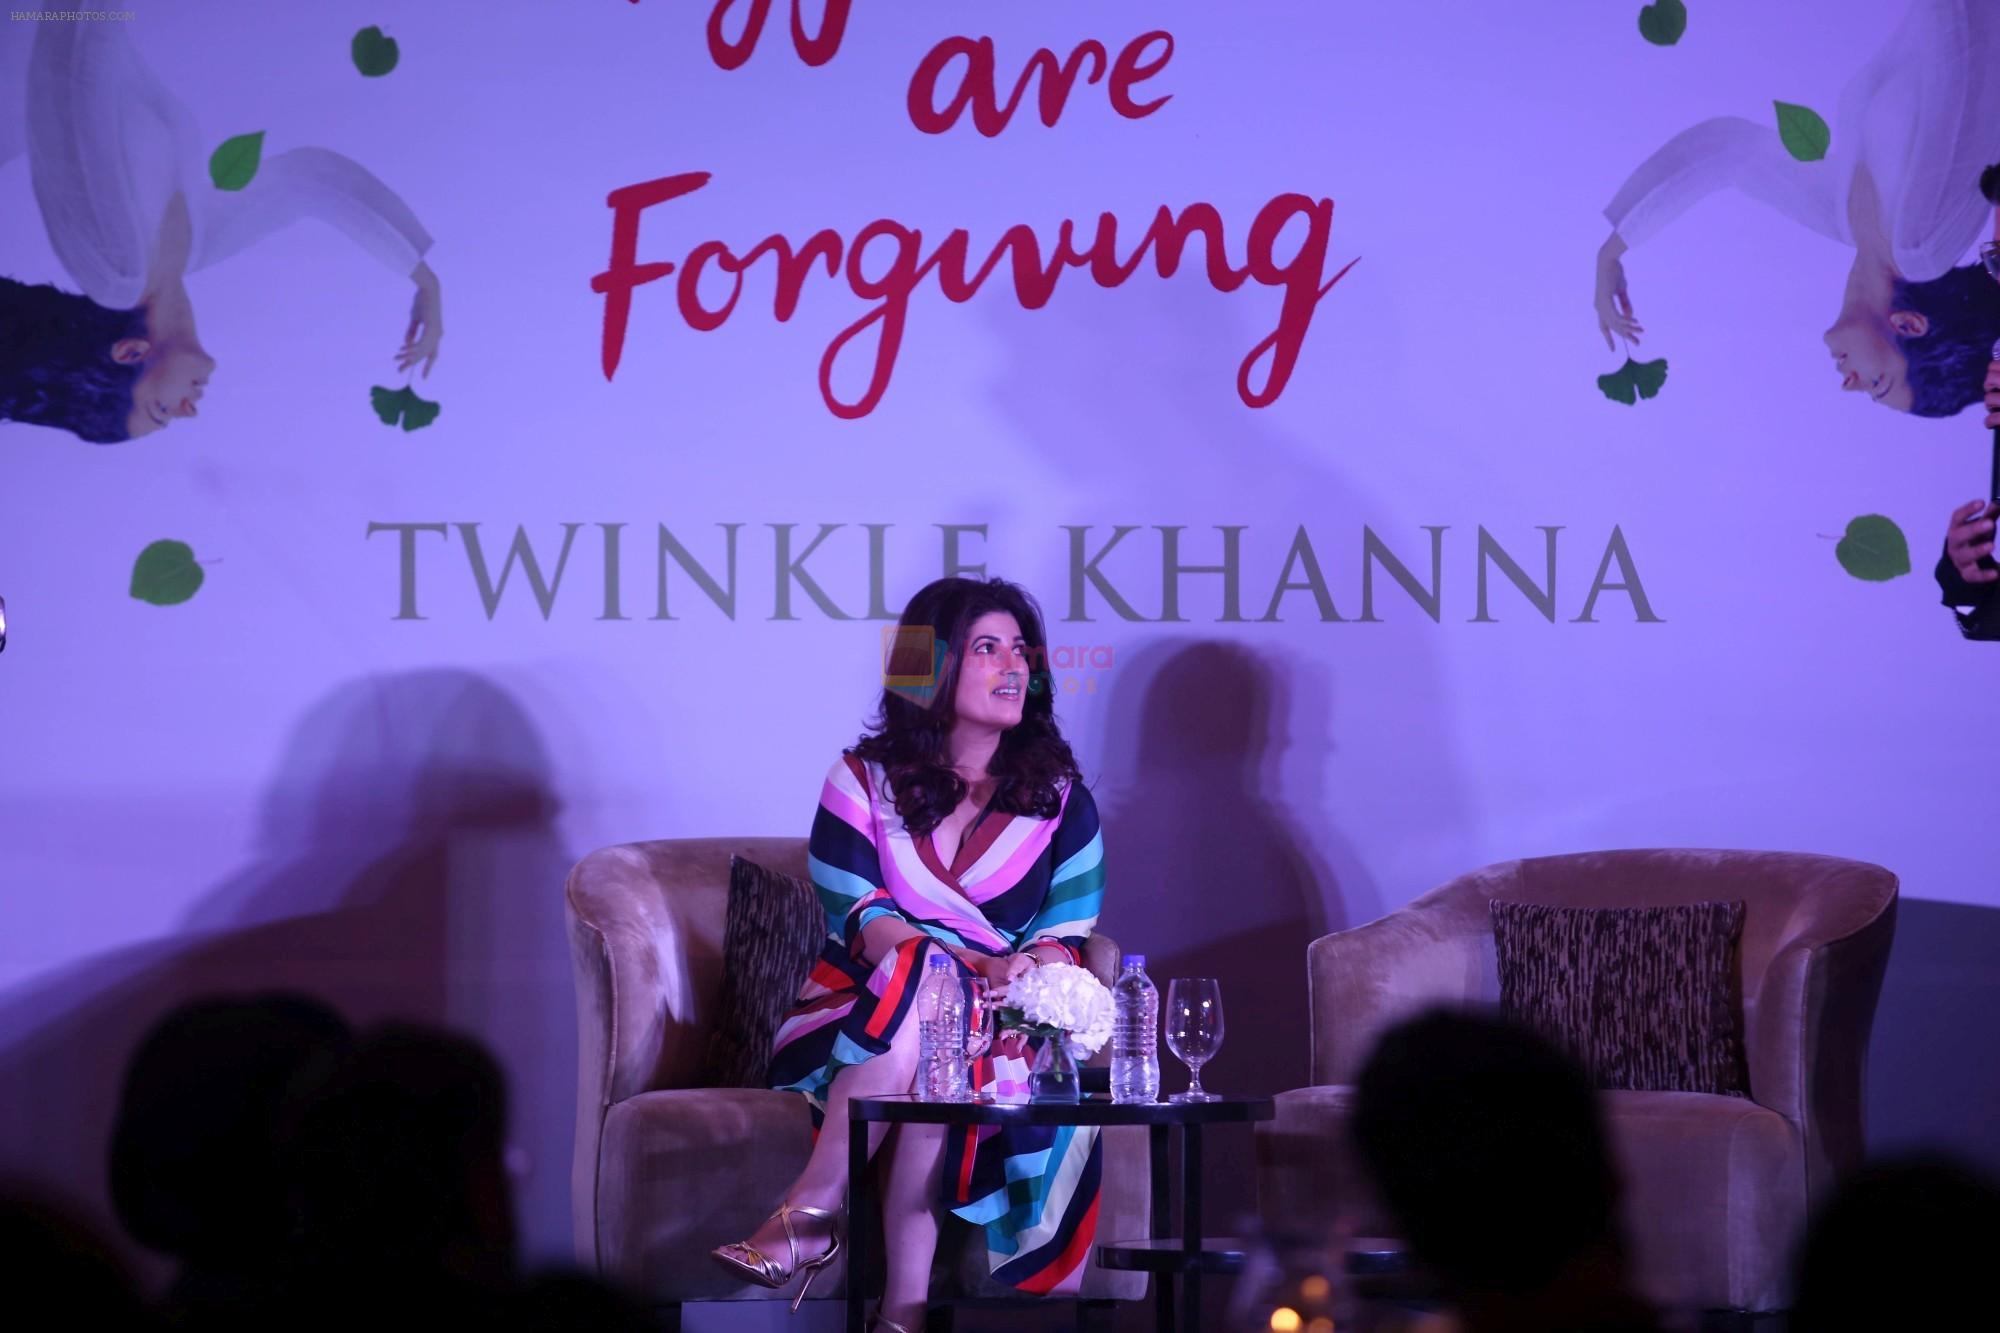 Twinkle Khanna at the Launch Of Twinkle Khanna's Book Pyjamas Are Forgiving in Taj Lands End Bandra on 7th Sept 2018